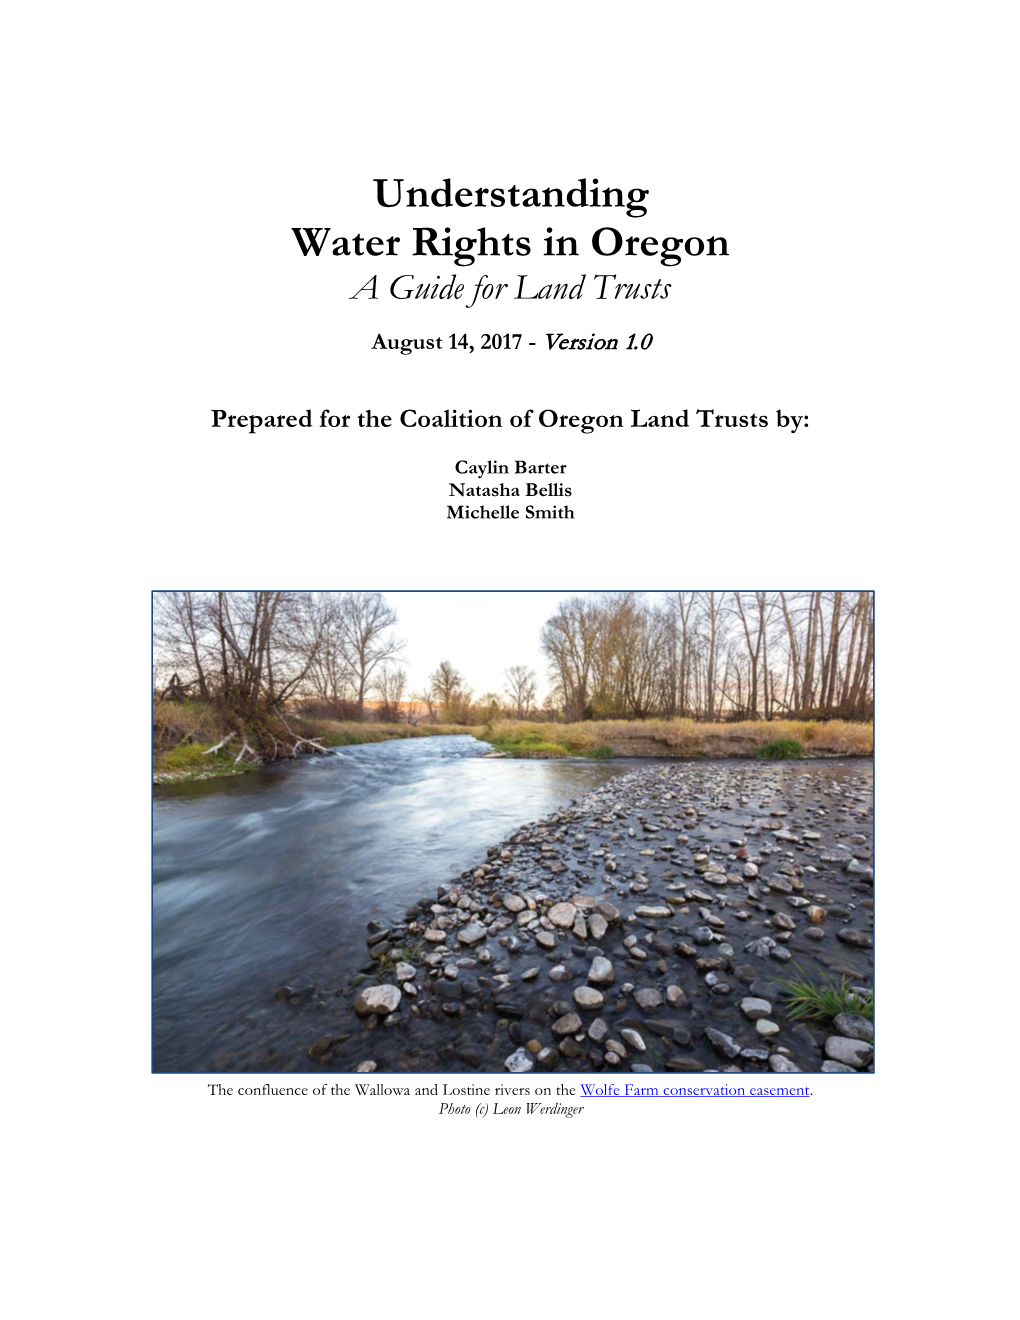 Understanding Water Rights in Oregon a Guide for Land Trusts